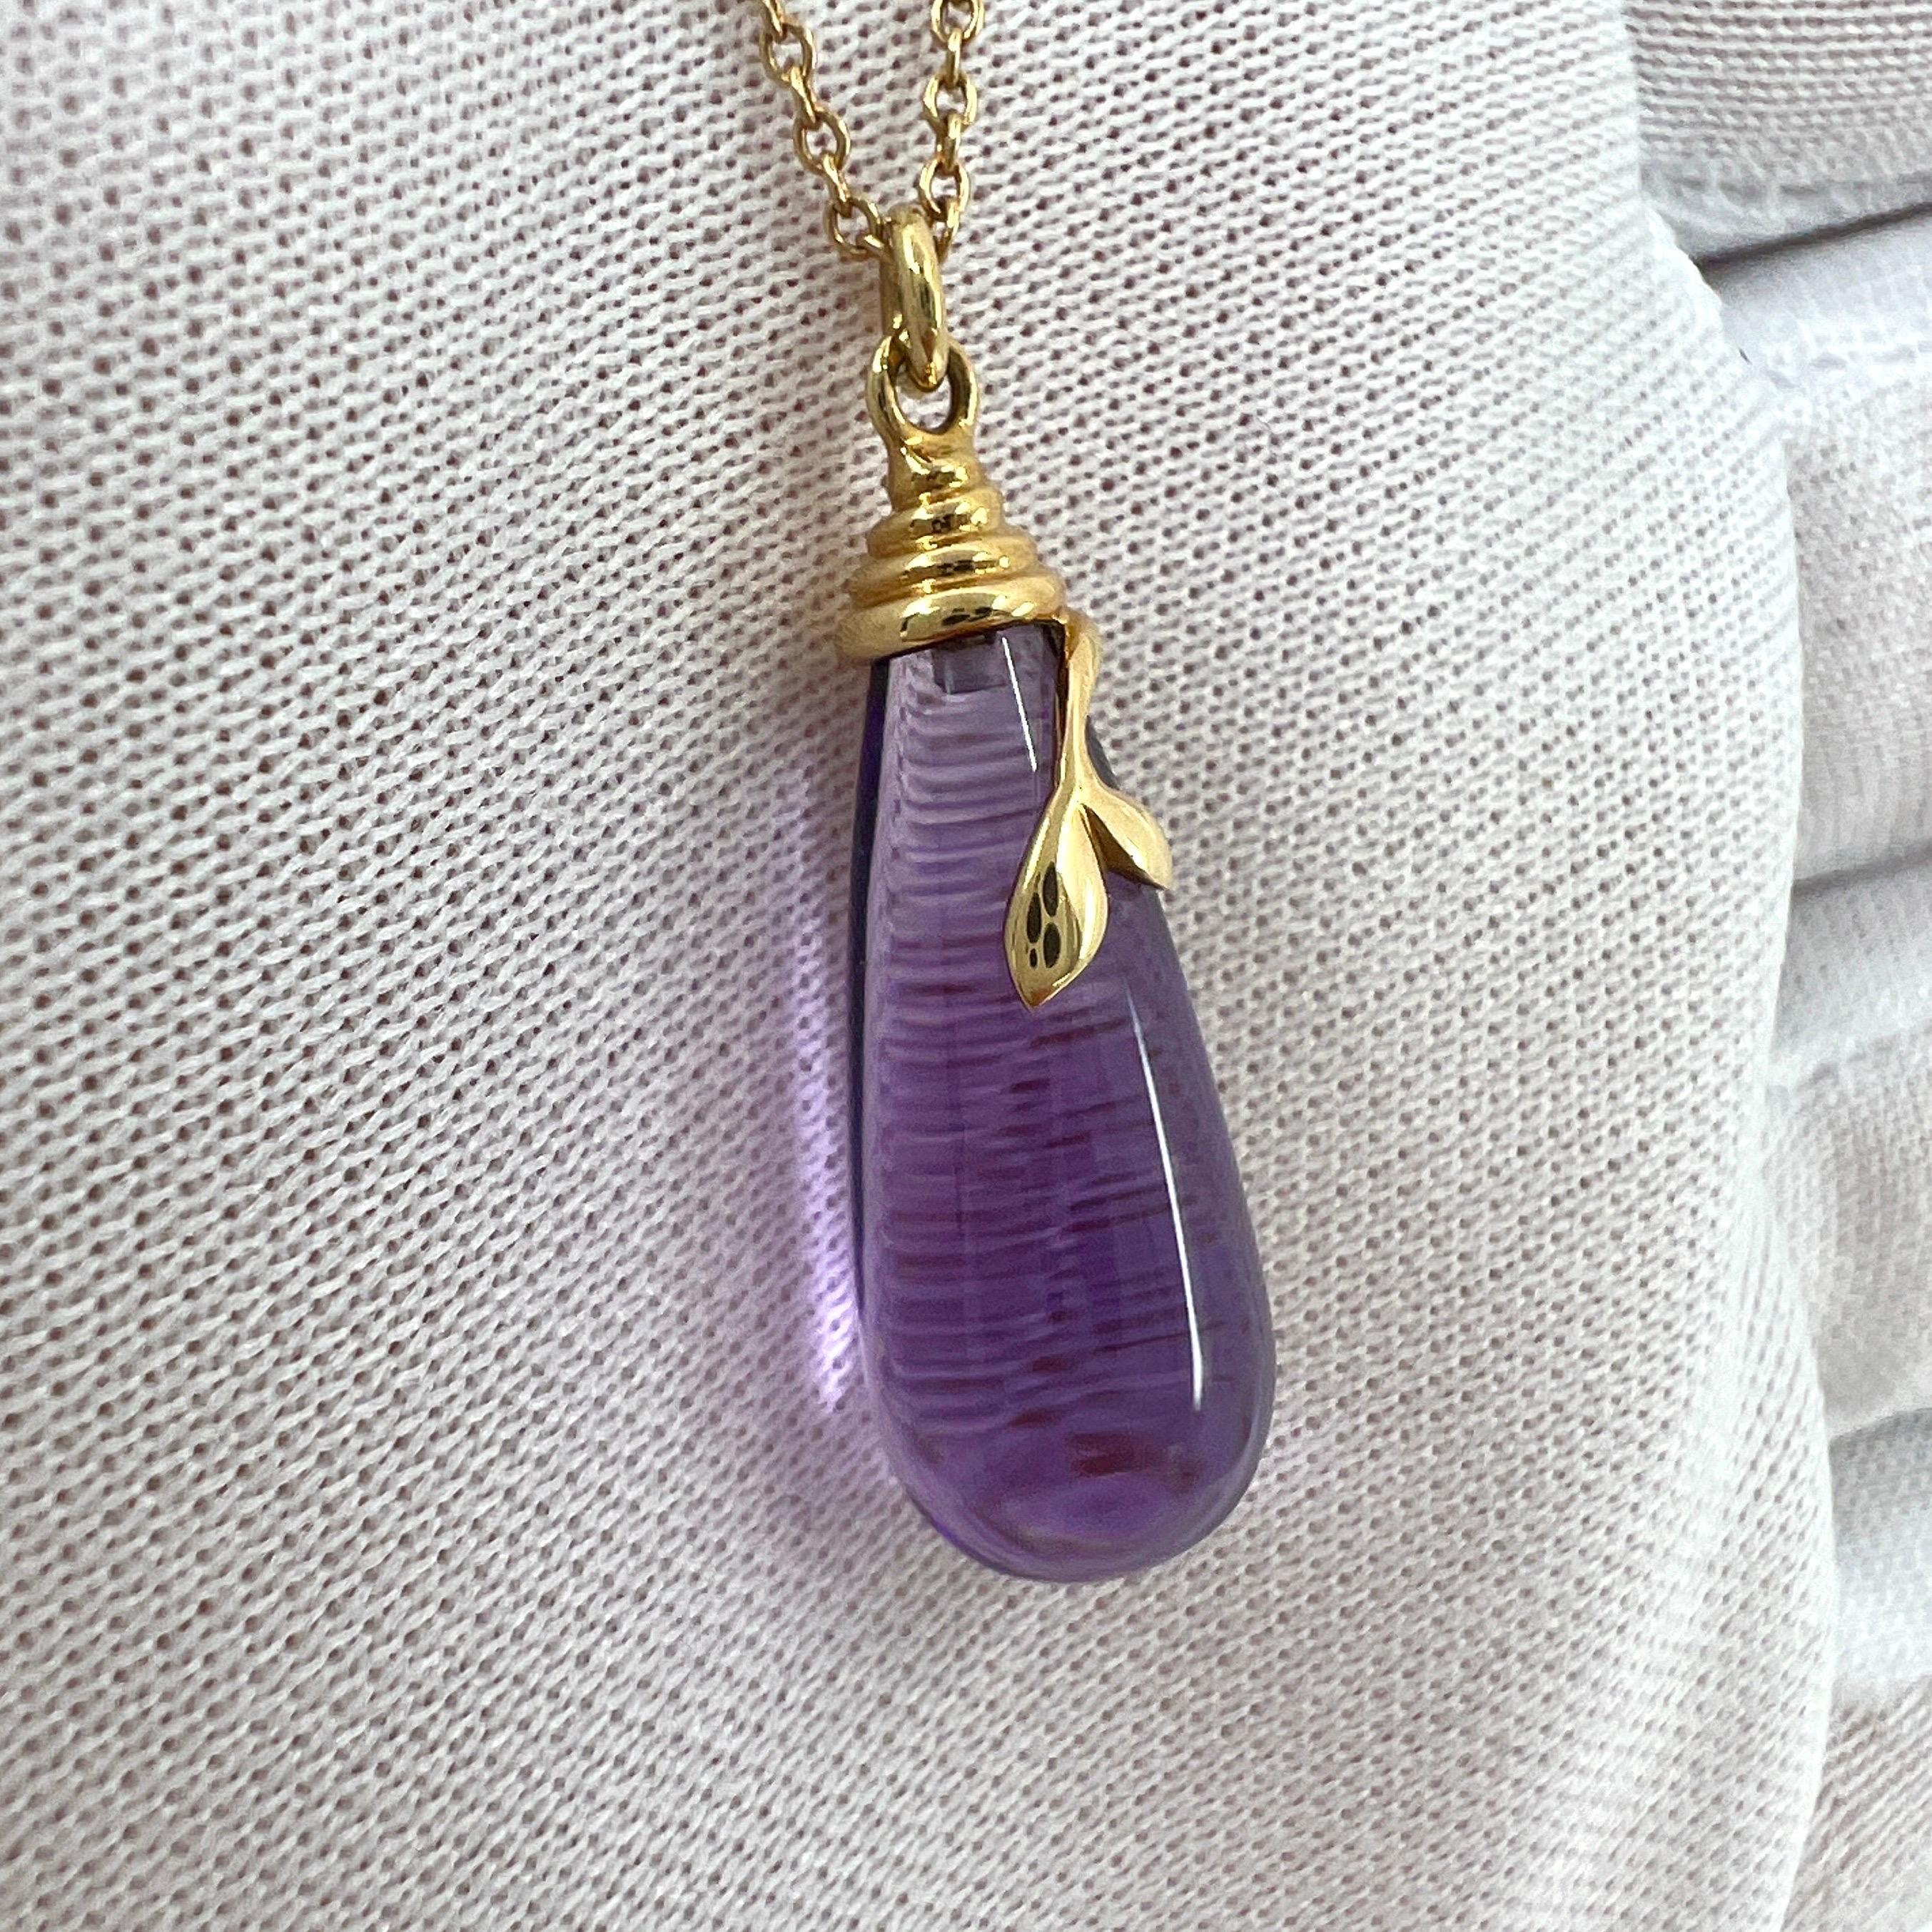 Rare Tiffany & Co. Paloma Picasso Olive Leaf Amethyst Gold Drop Pendant Necklace In Excellent Condition For Sale In Birmingham, GB